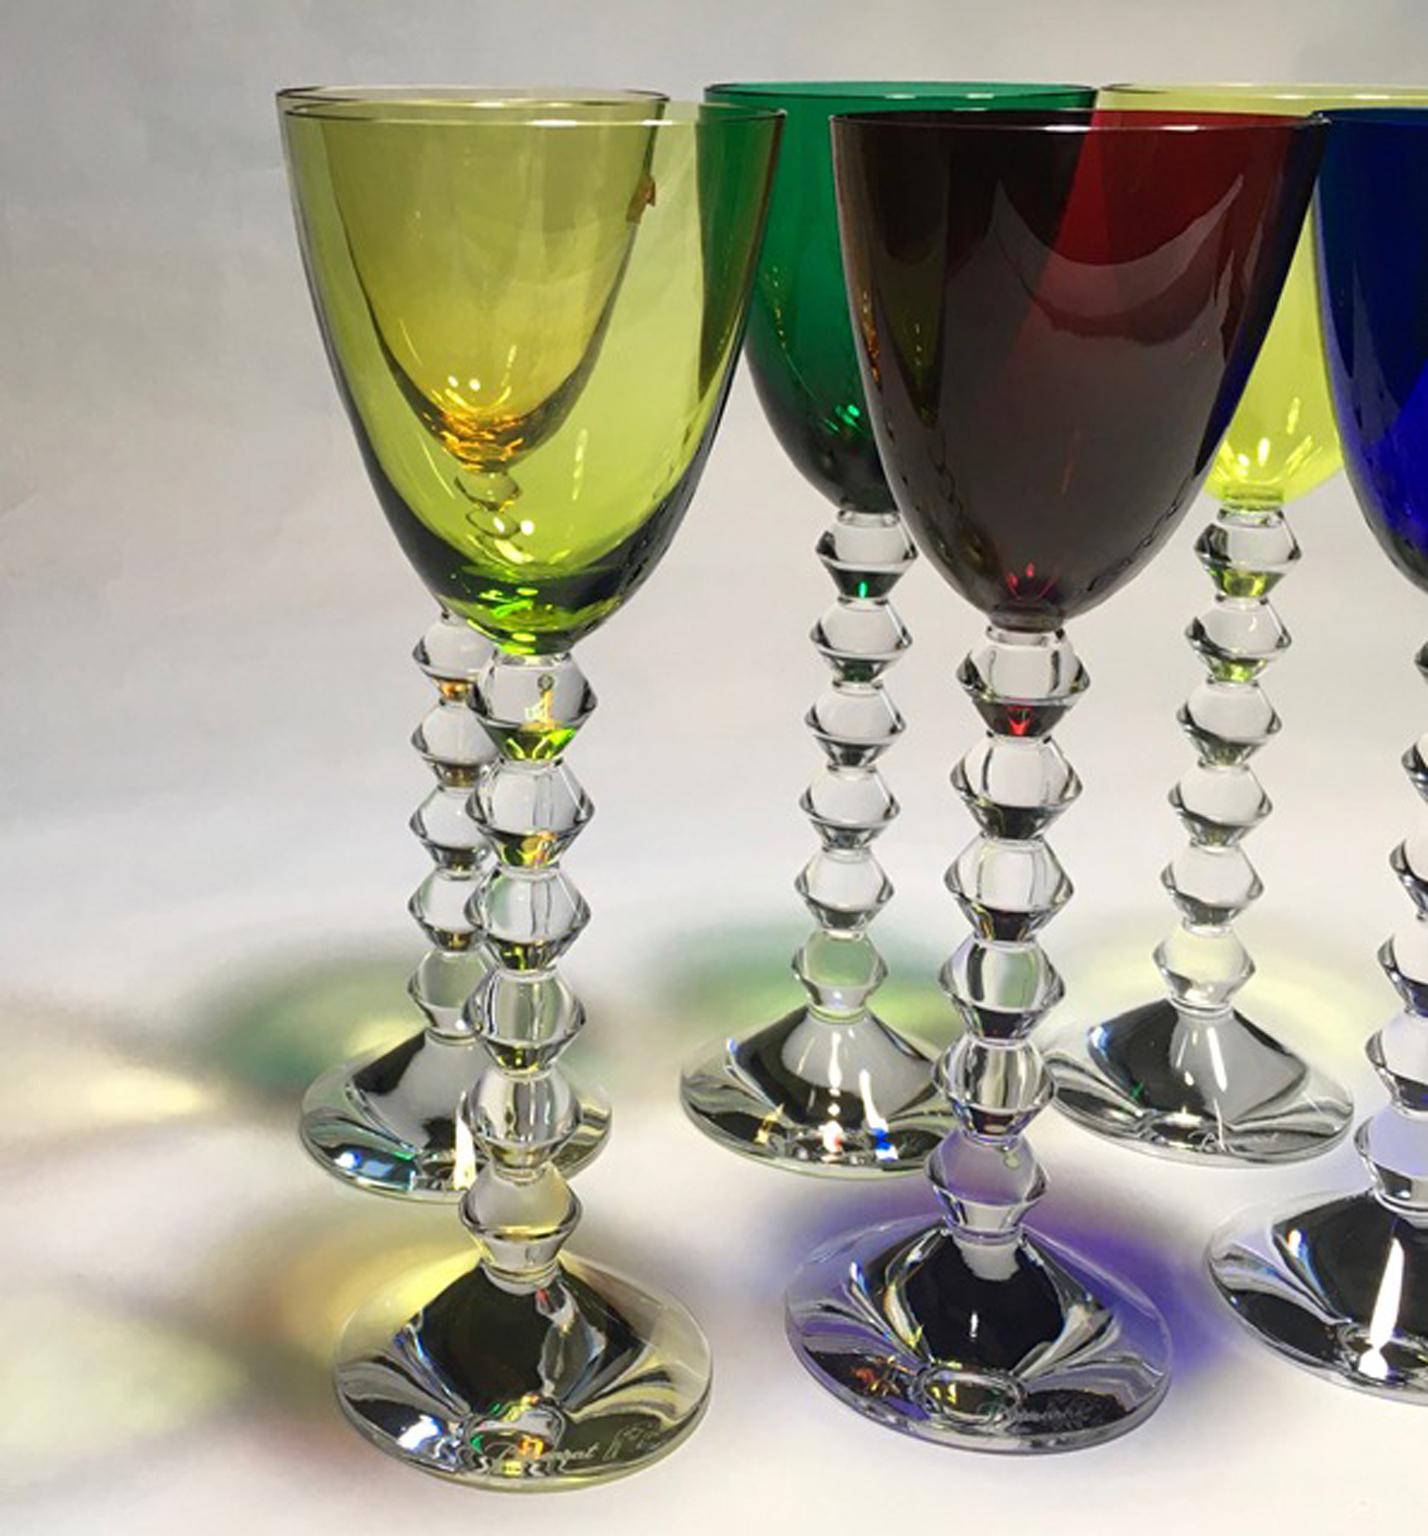 Set of 6 Baccarat Crystal Glasses in Modern Style Green Red Blue 8